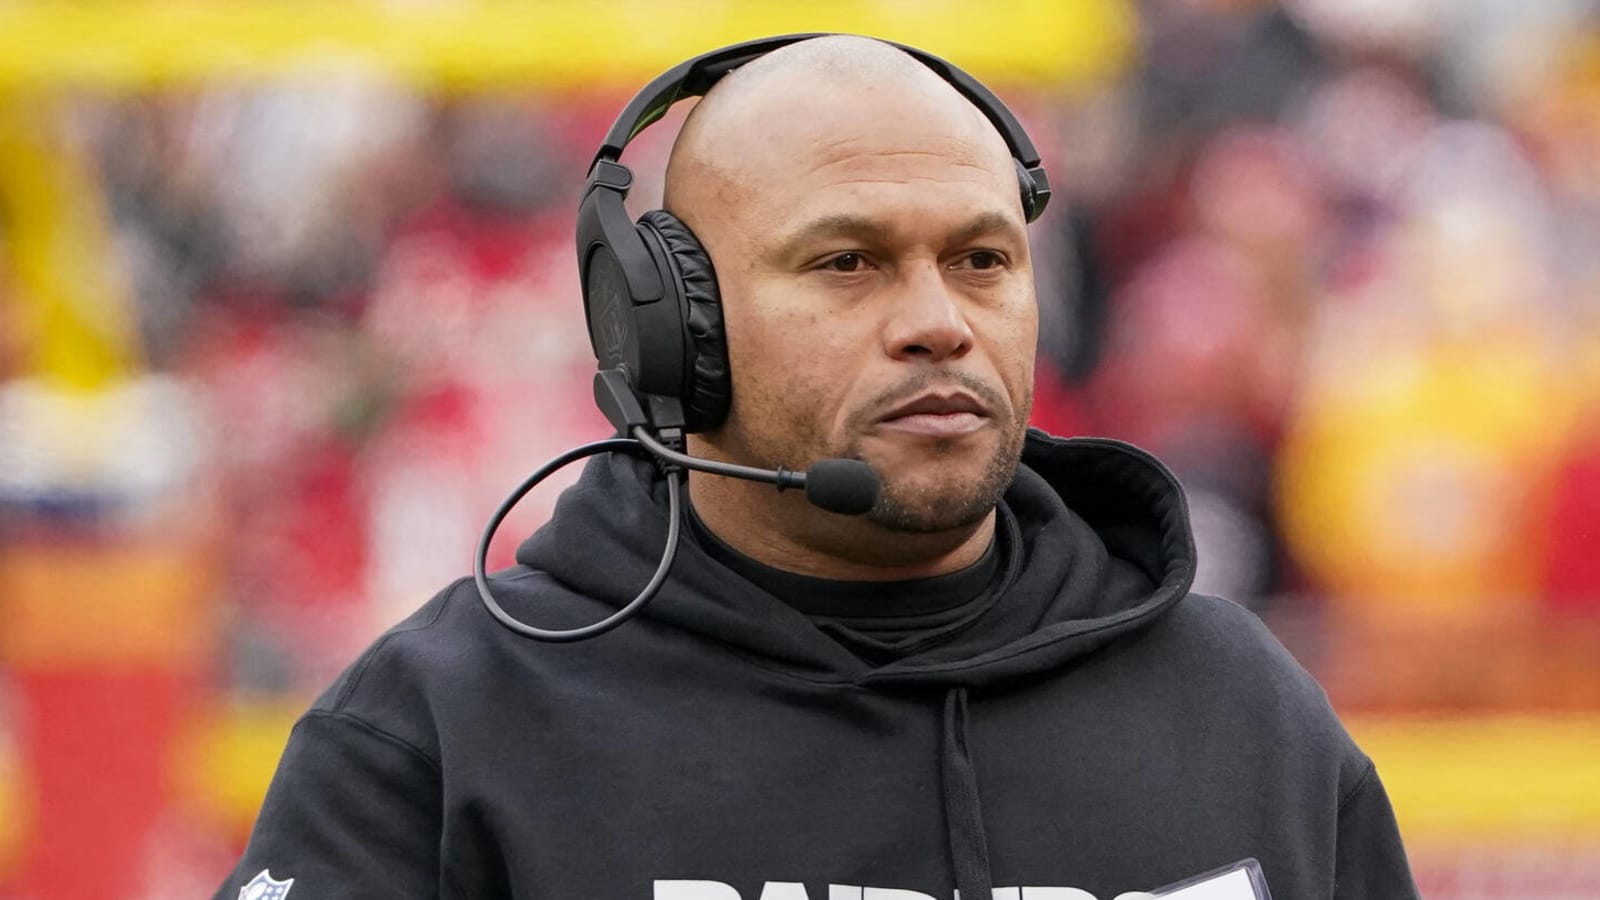 Changes could come to Raiders if Antonio Pierce isn't named HC